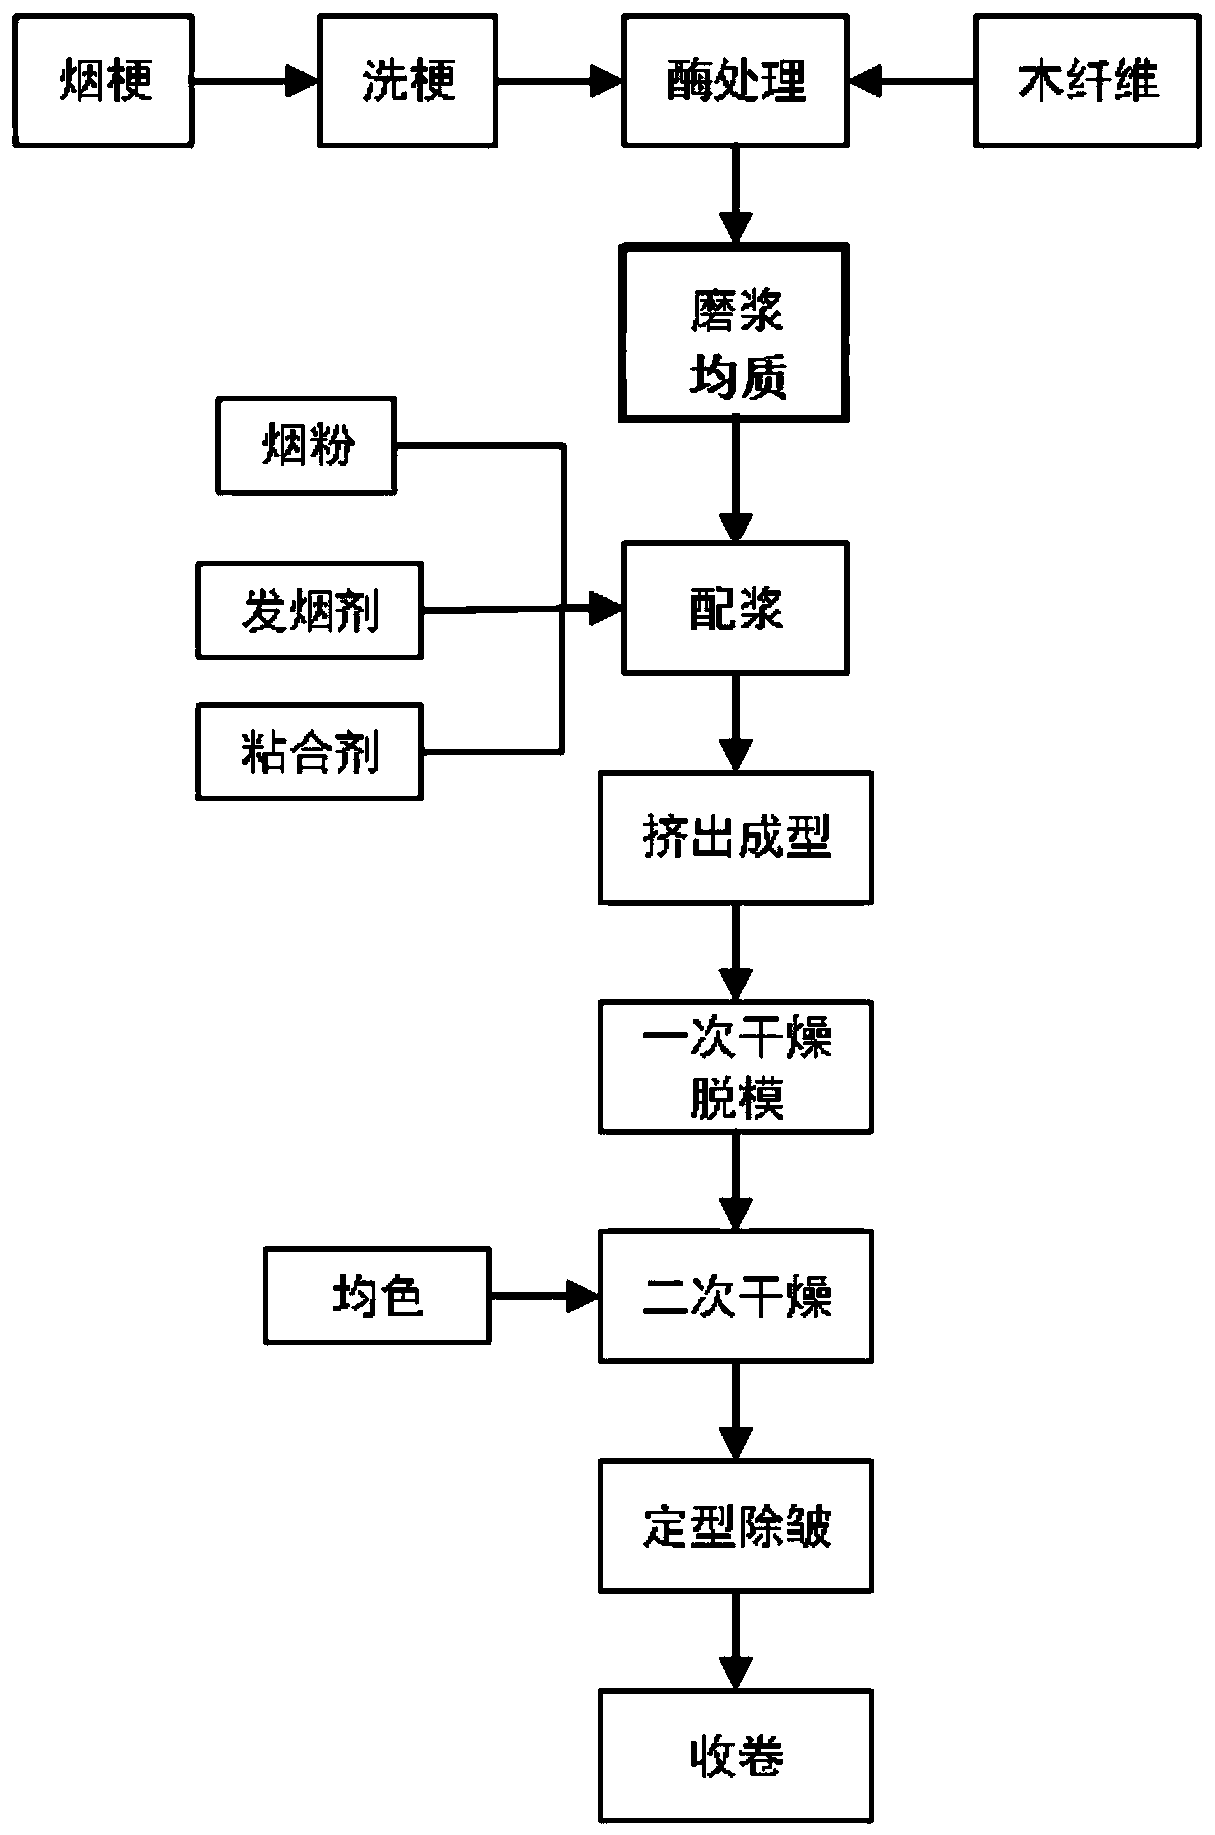 Method for producing high-strength homogenized tobacco material by thick pulp papermaking method